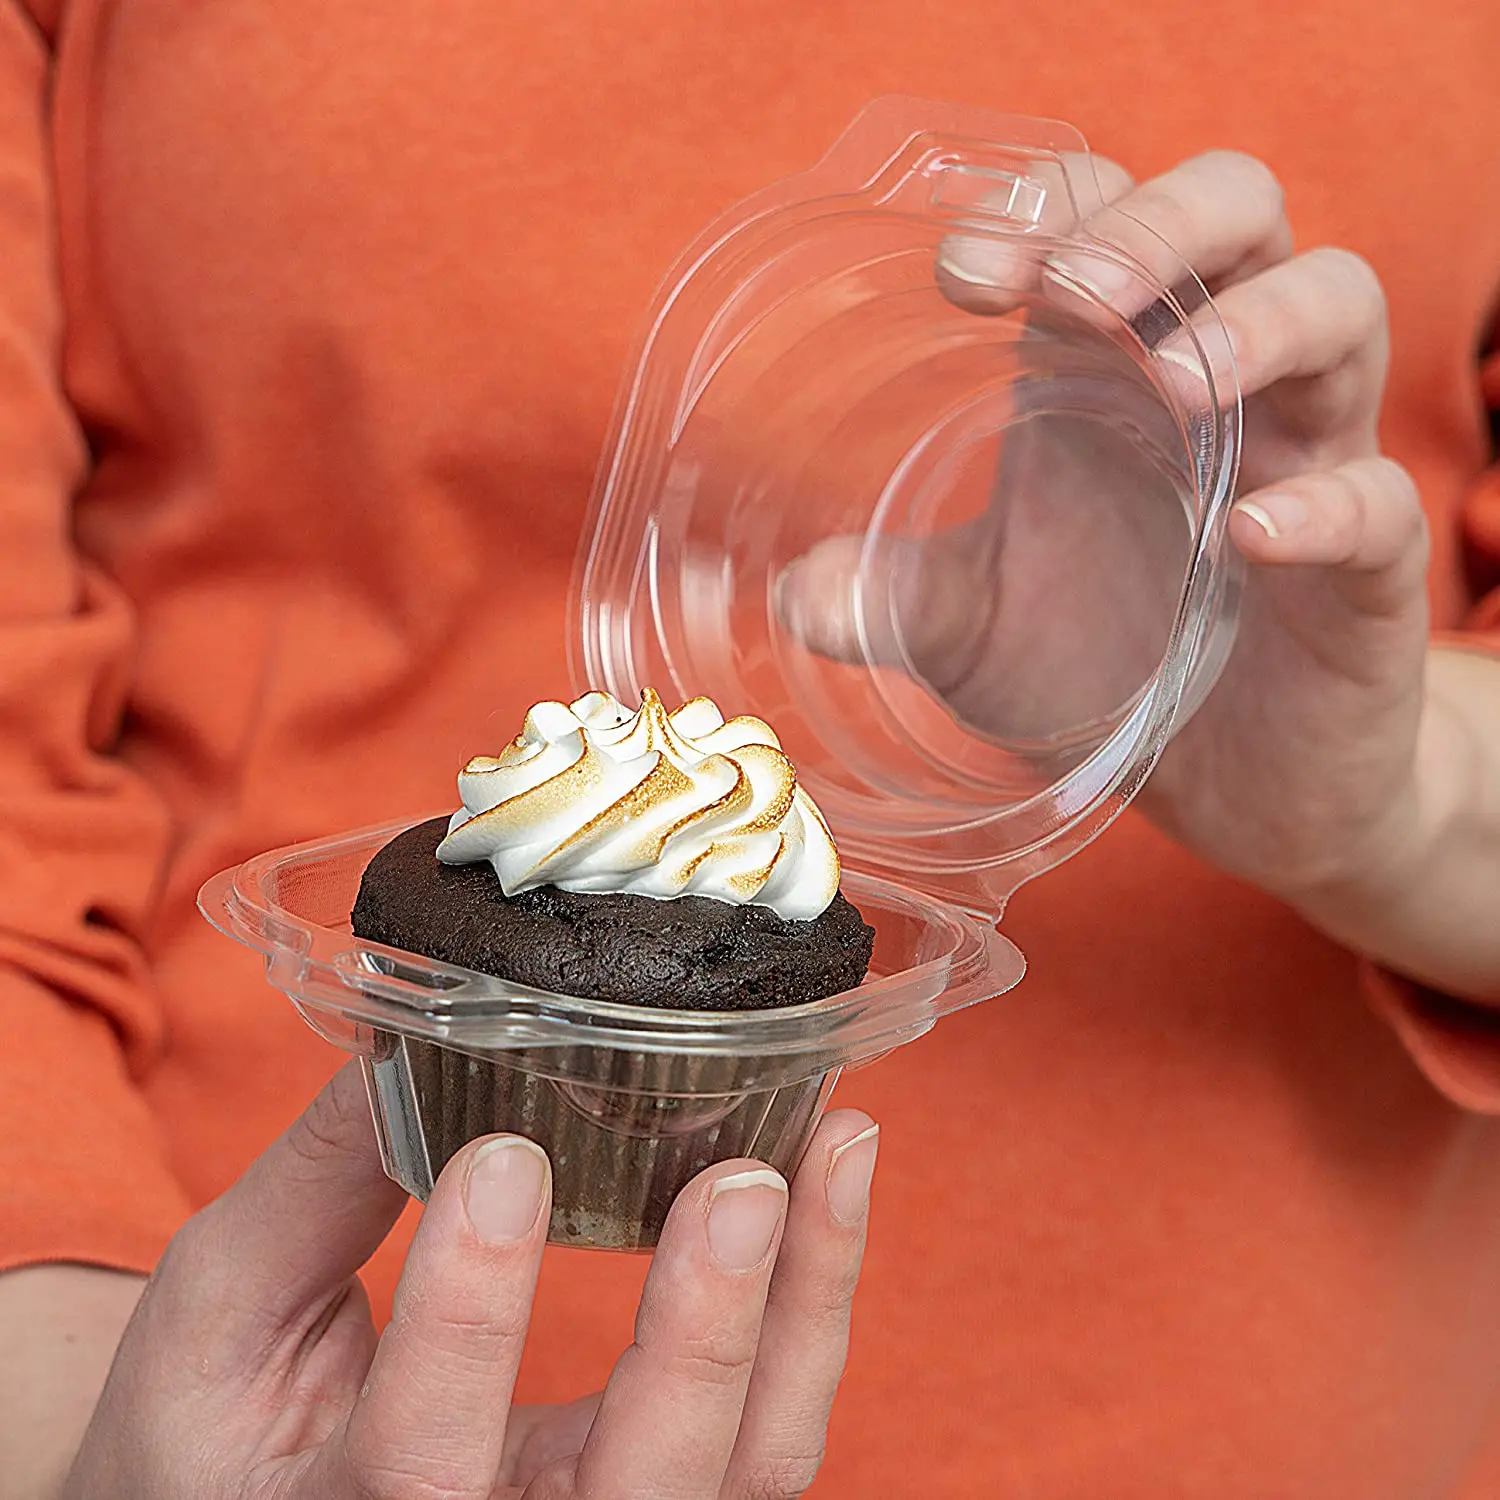 Choice 2-Compartment Clear OPS Plastic Cupcake / Muffin Container